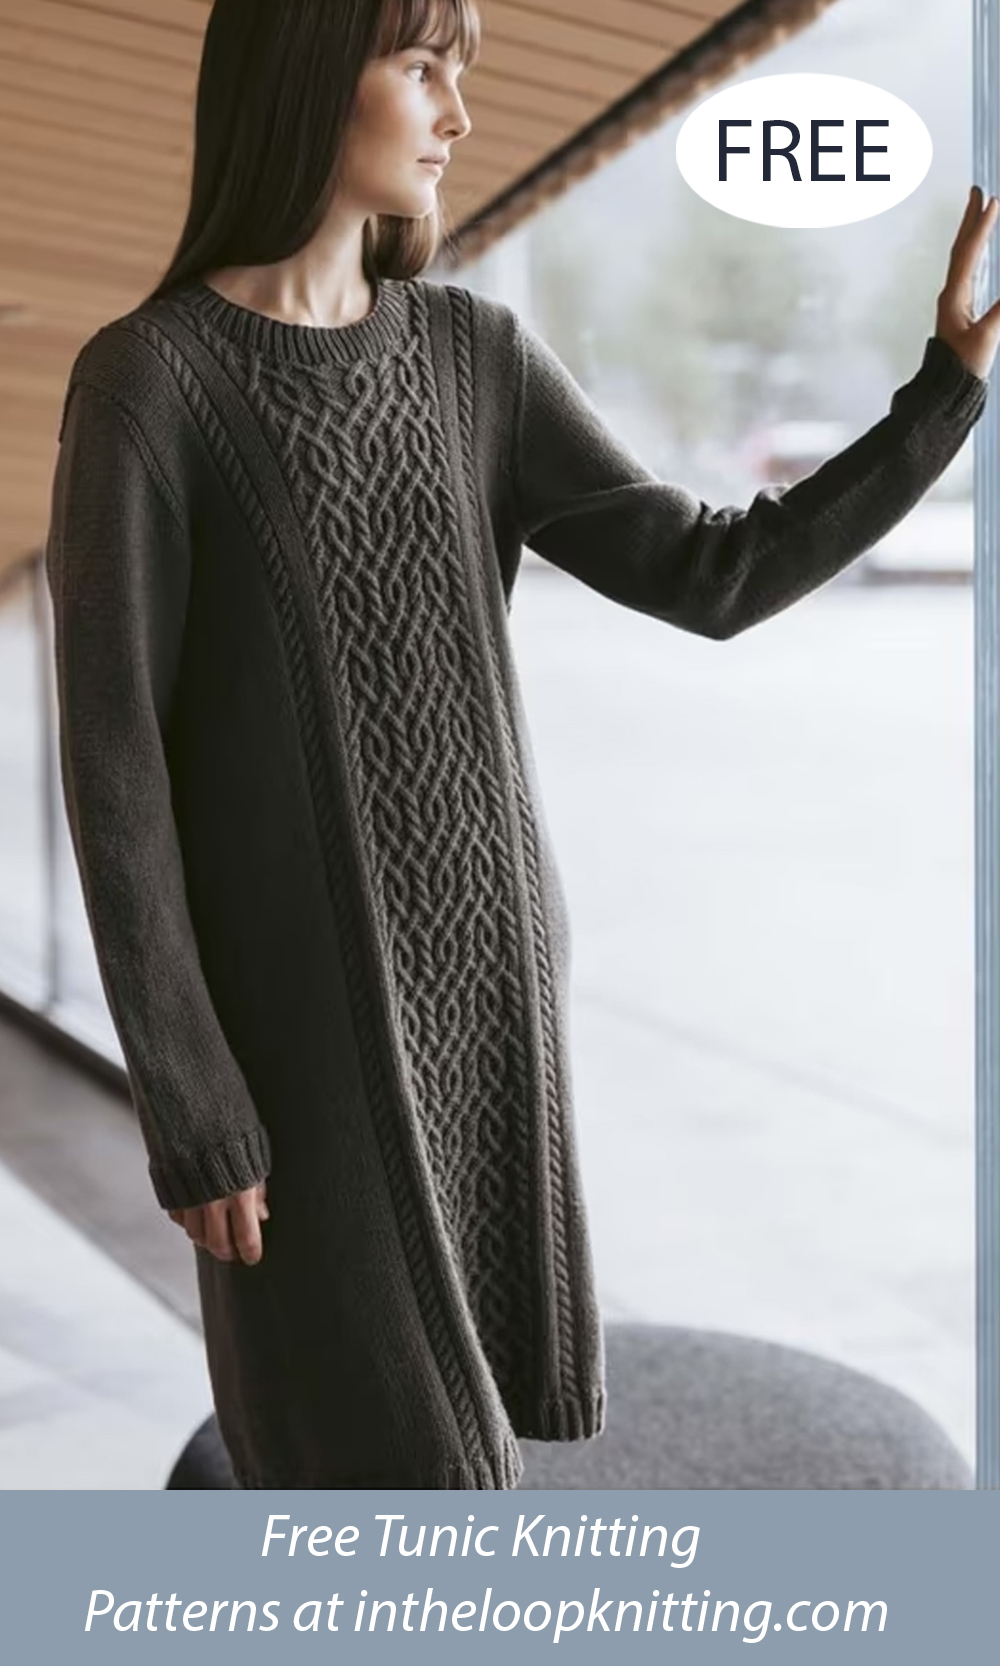 Free Knitting Pattern for Kaari Tunic Cabled Sweater